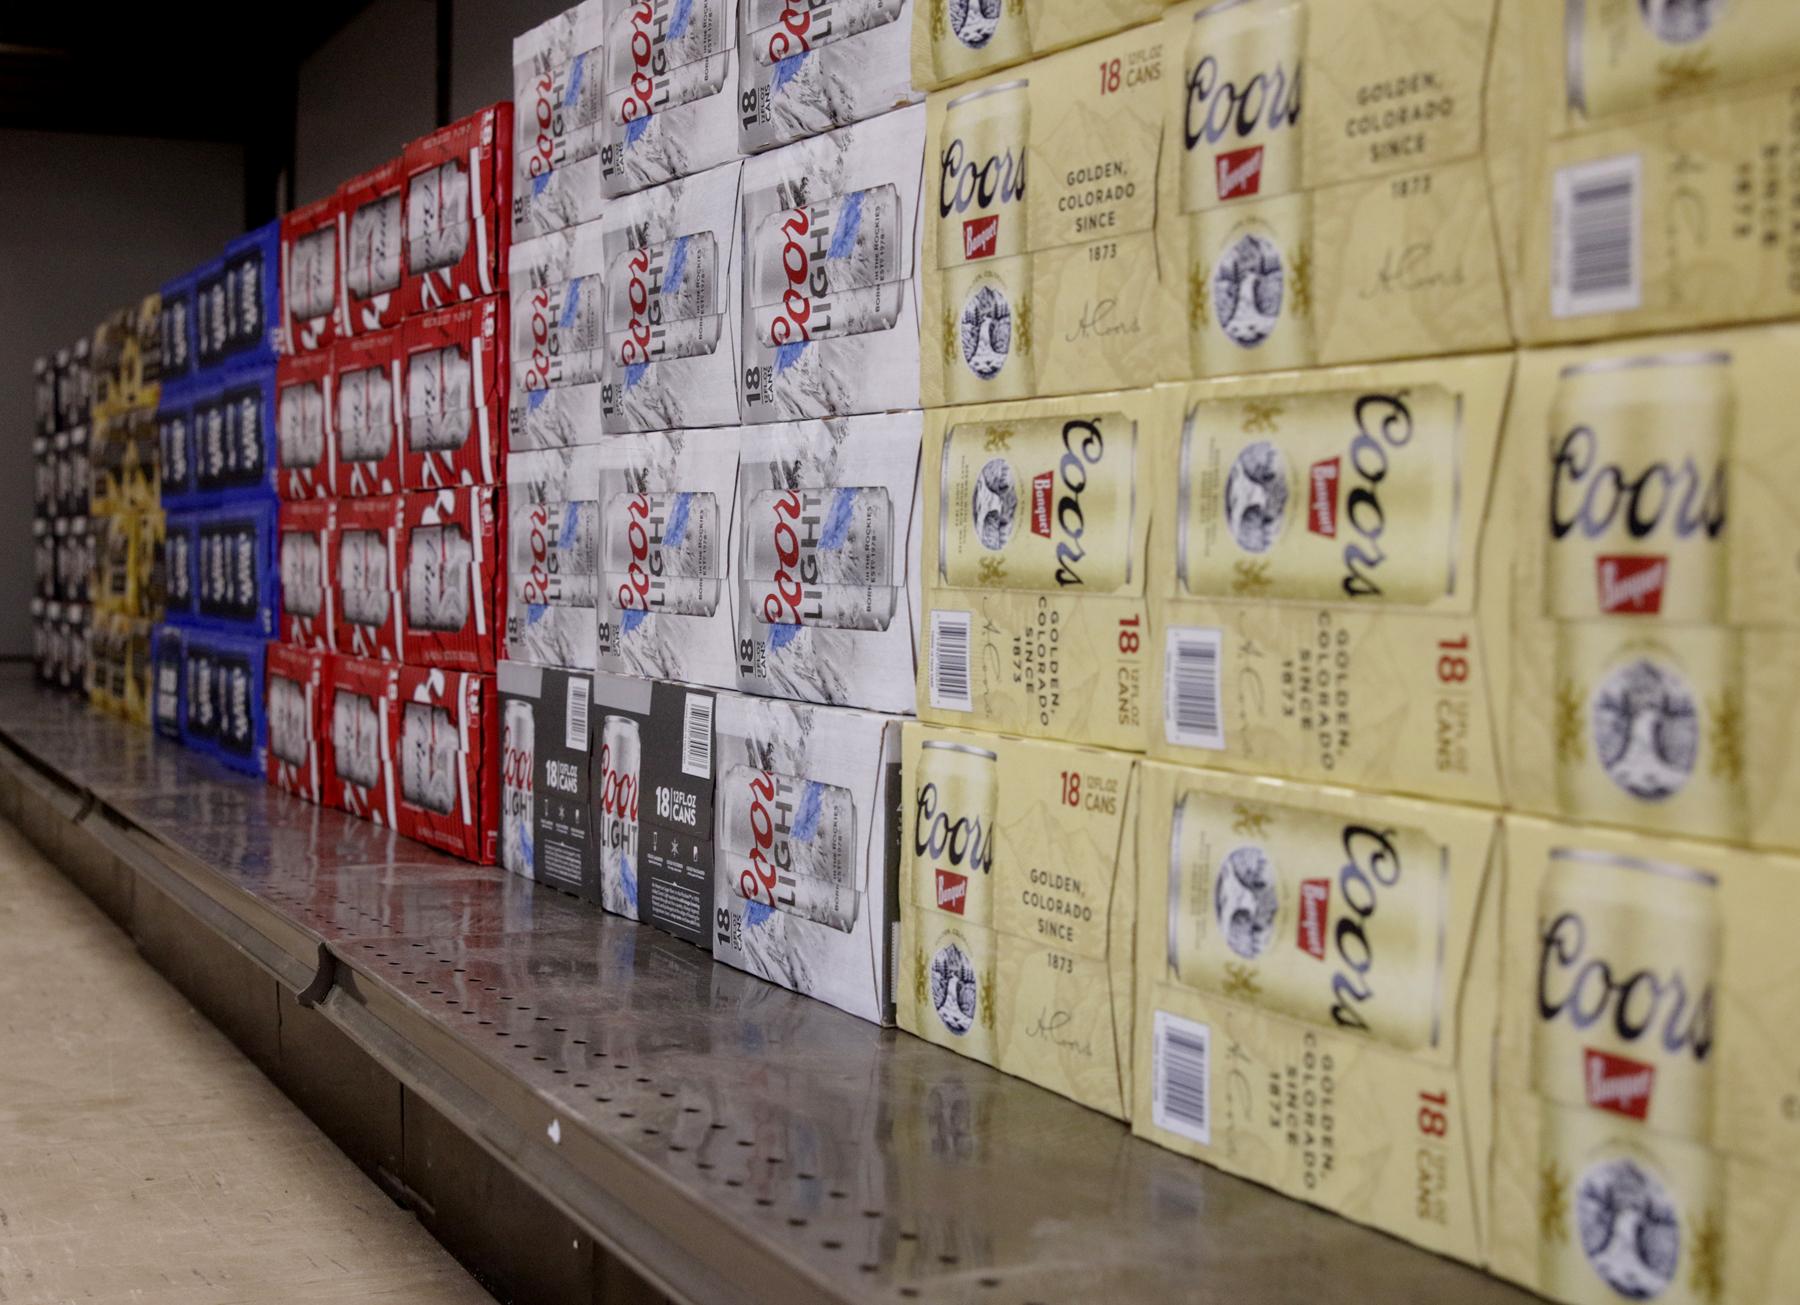 Eighteen packs of canned beer line the shelves at the opening of BNC's liquor store, Bethel Spirits, on Sept. 27, 2016. (Photo by Dean Swope, KYUK - Bethel)